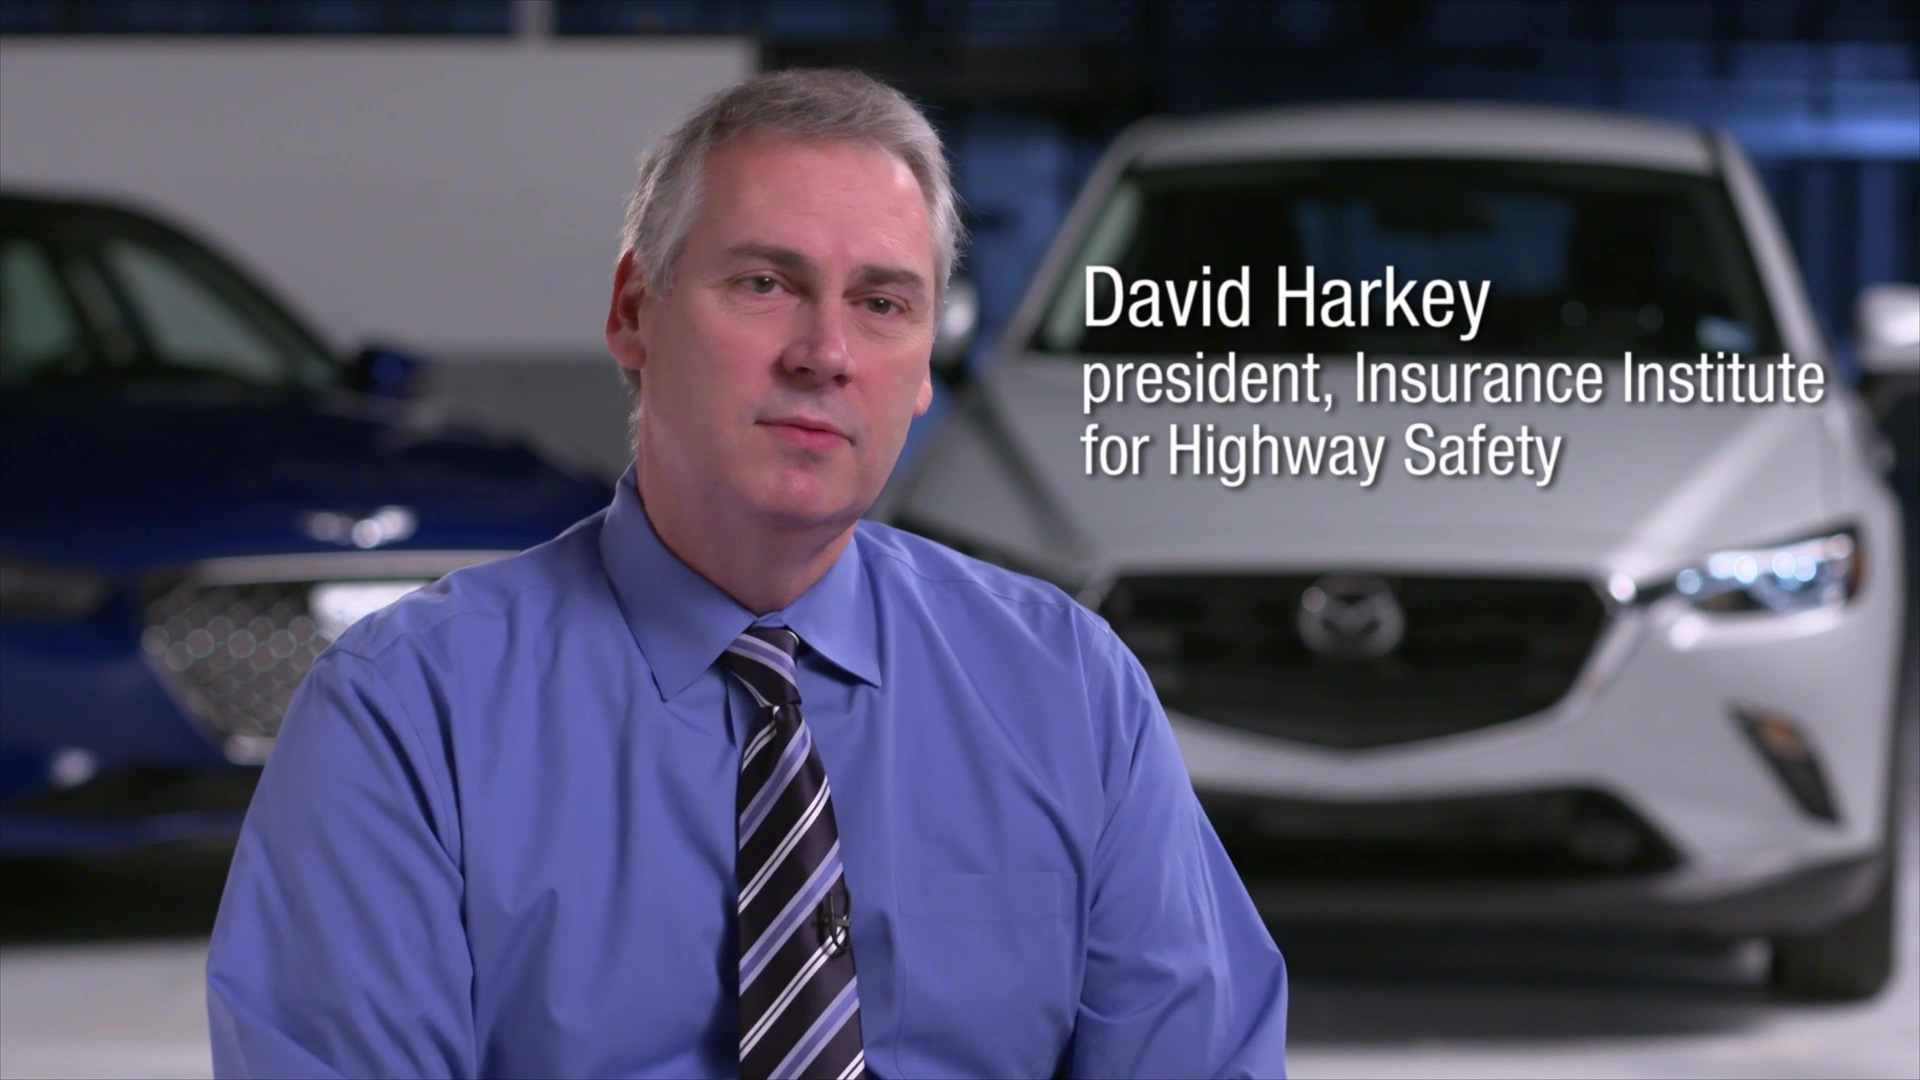 David Harkey - The President Of The Insurance Institute For Highway Safety